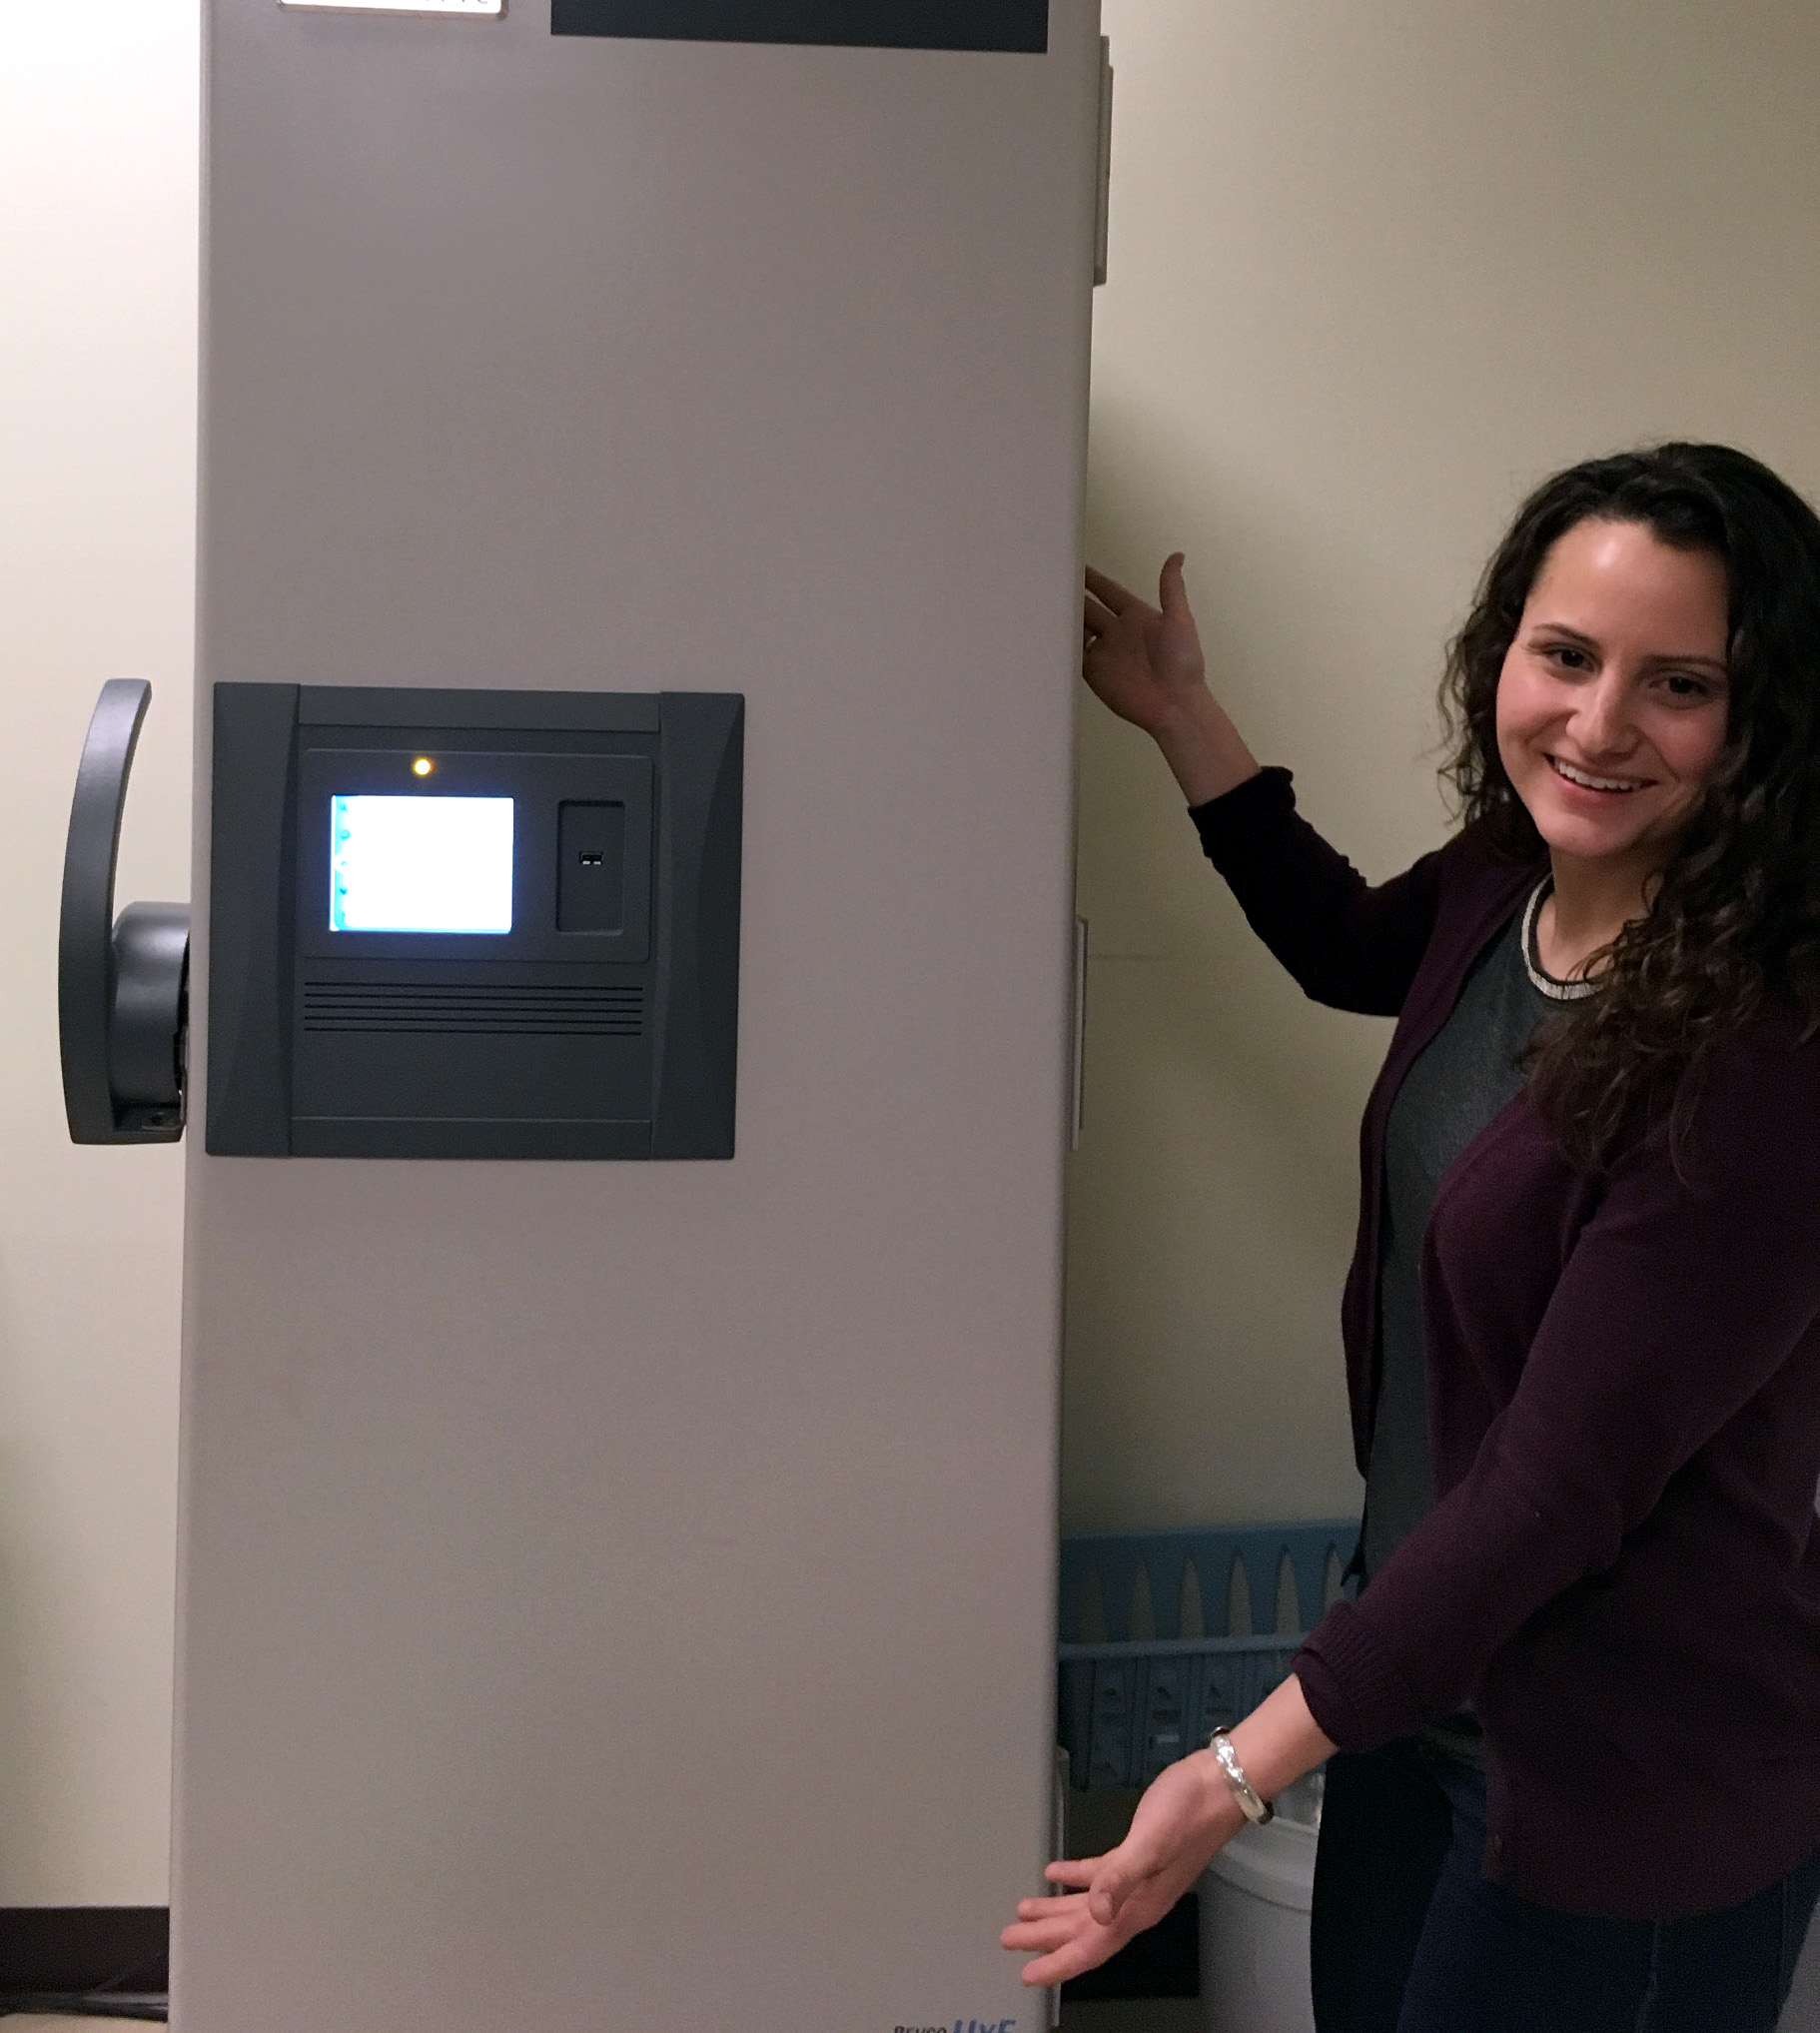 BLaST graduate assistant Madison Kosma shows off a new BLaST-funded freezer to be used in the Straley lab at the University of Alaska Southeast Sitka campus.